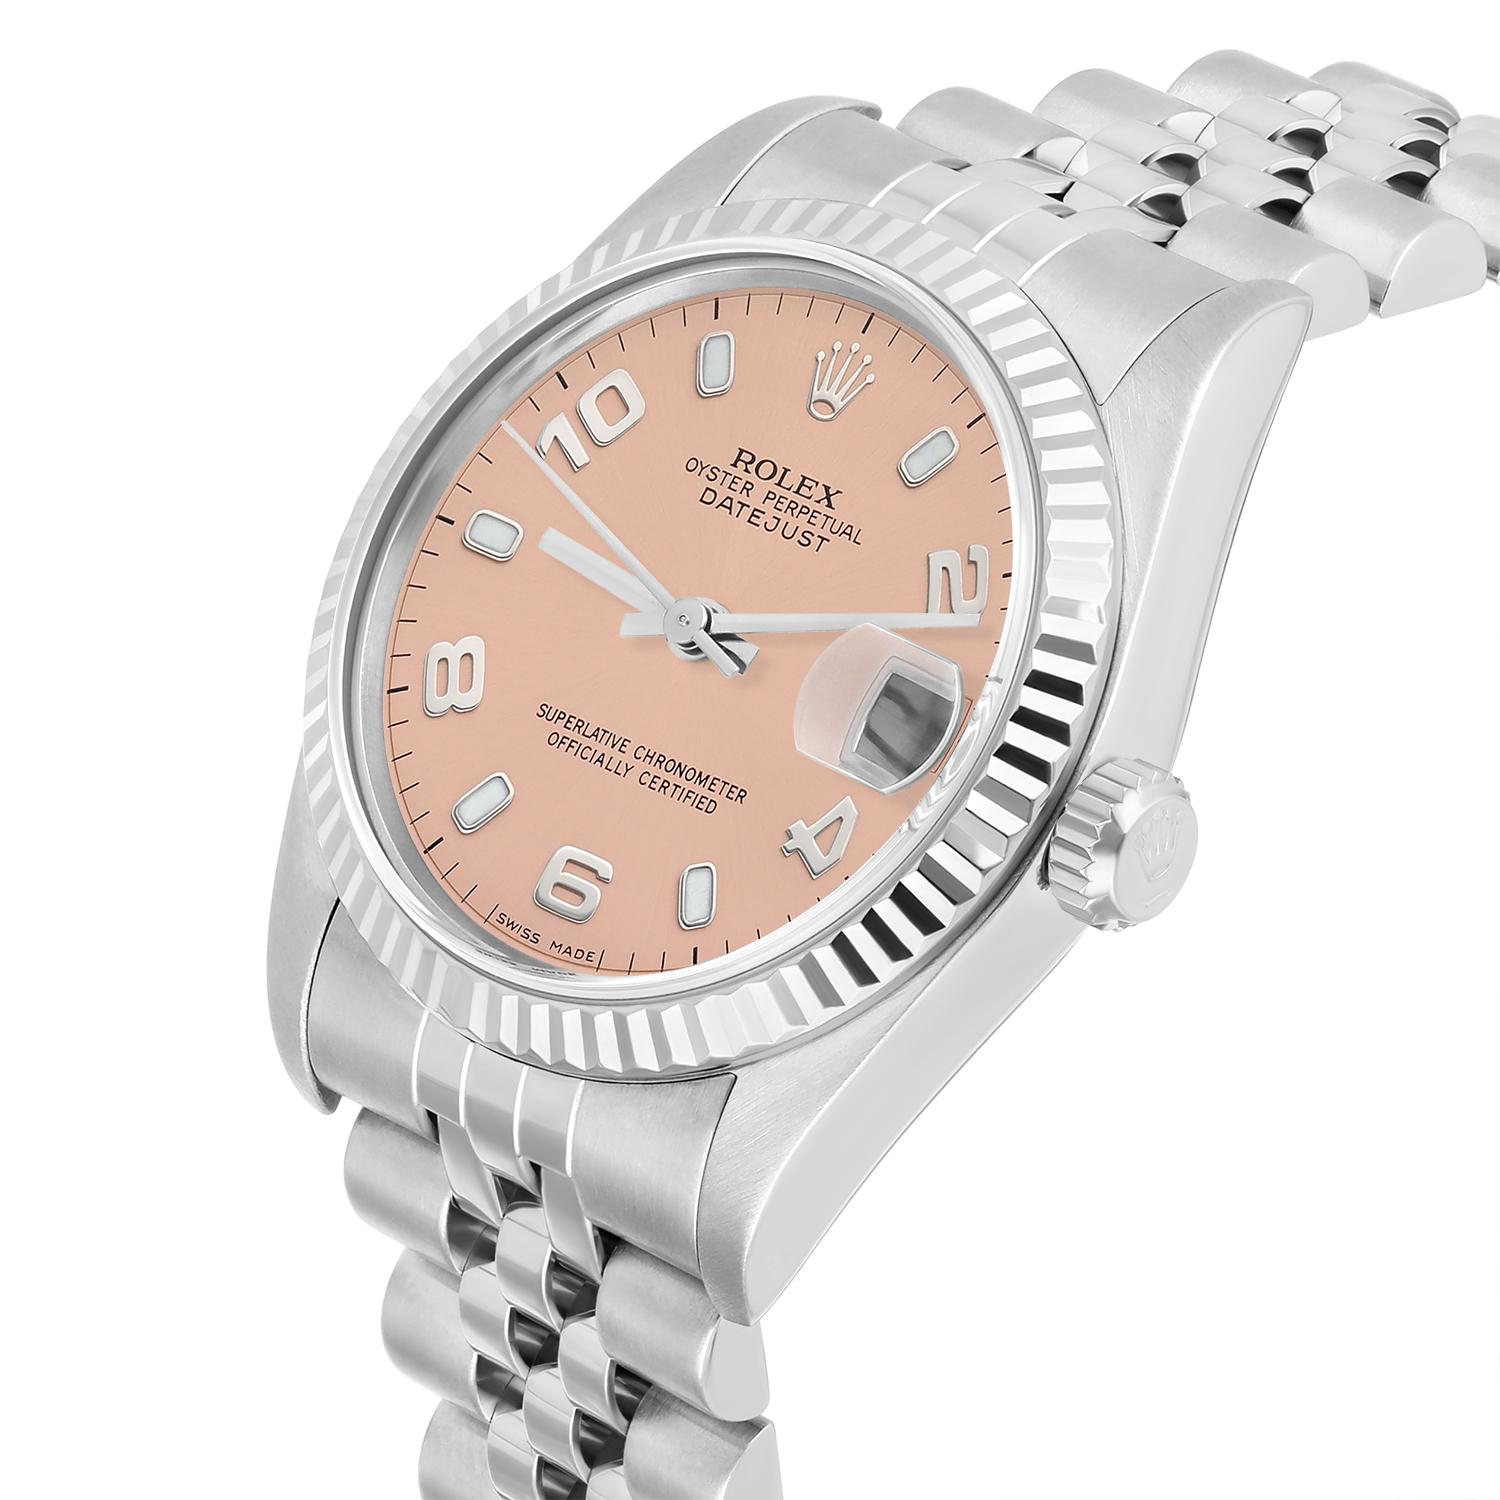 Rolex Datejust 31mm 68274 Salmon Dial Stainless Steel Watch W/G Bezel Circa 1997 For Sale 2